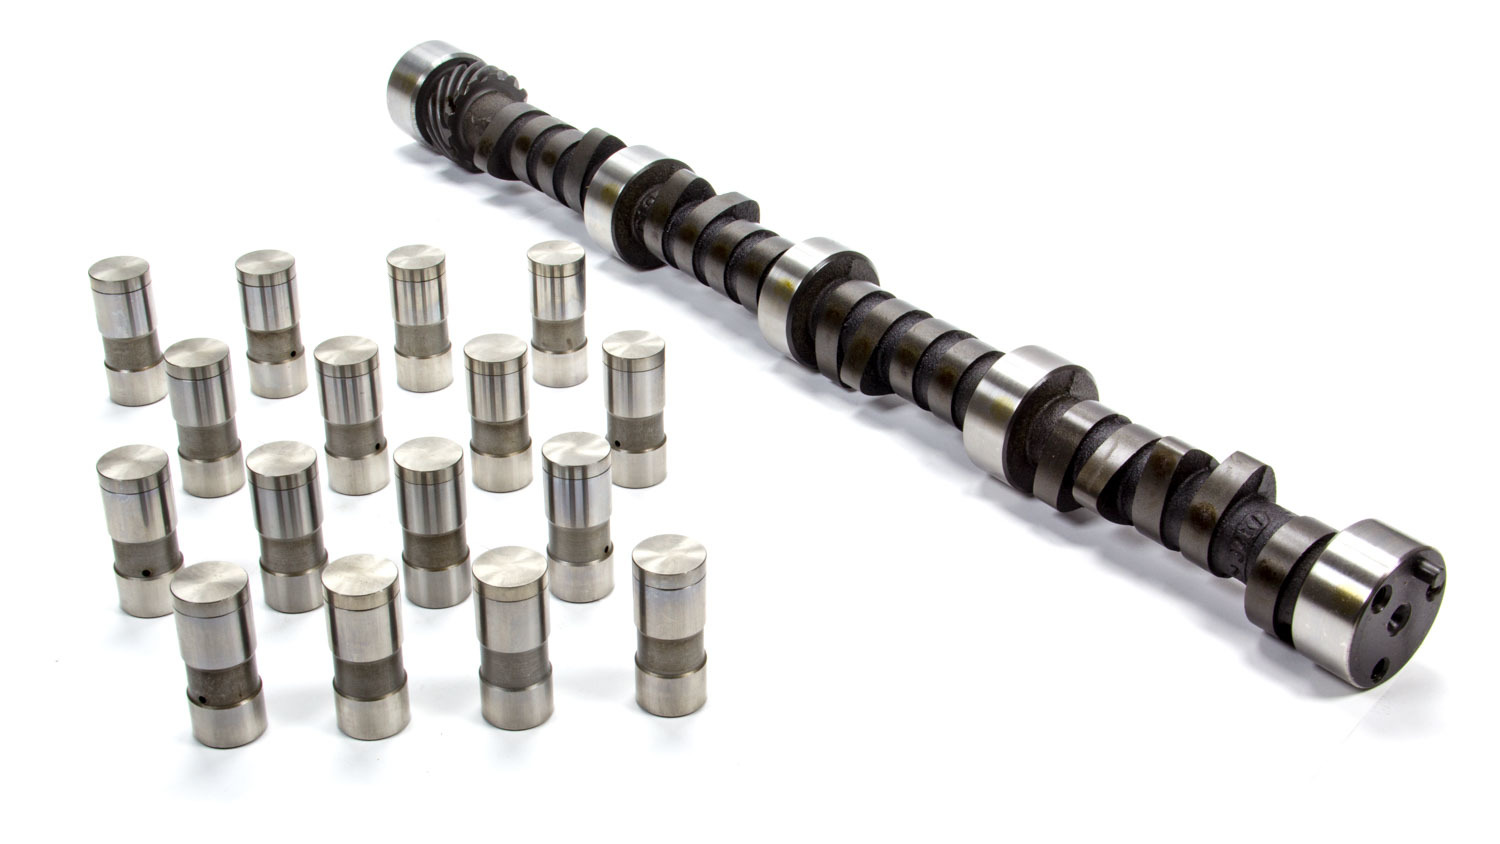 Elgin CL-1069PK Camshaft / Lifters, Street Performance, Hydraulic Flat Tappet, Lift 0.443 / 0.443 in, Duration 280 / 280, 115 LSA, 2000 / 4800 RPM, Small Block Chevy, Kit